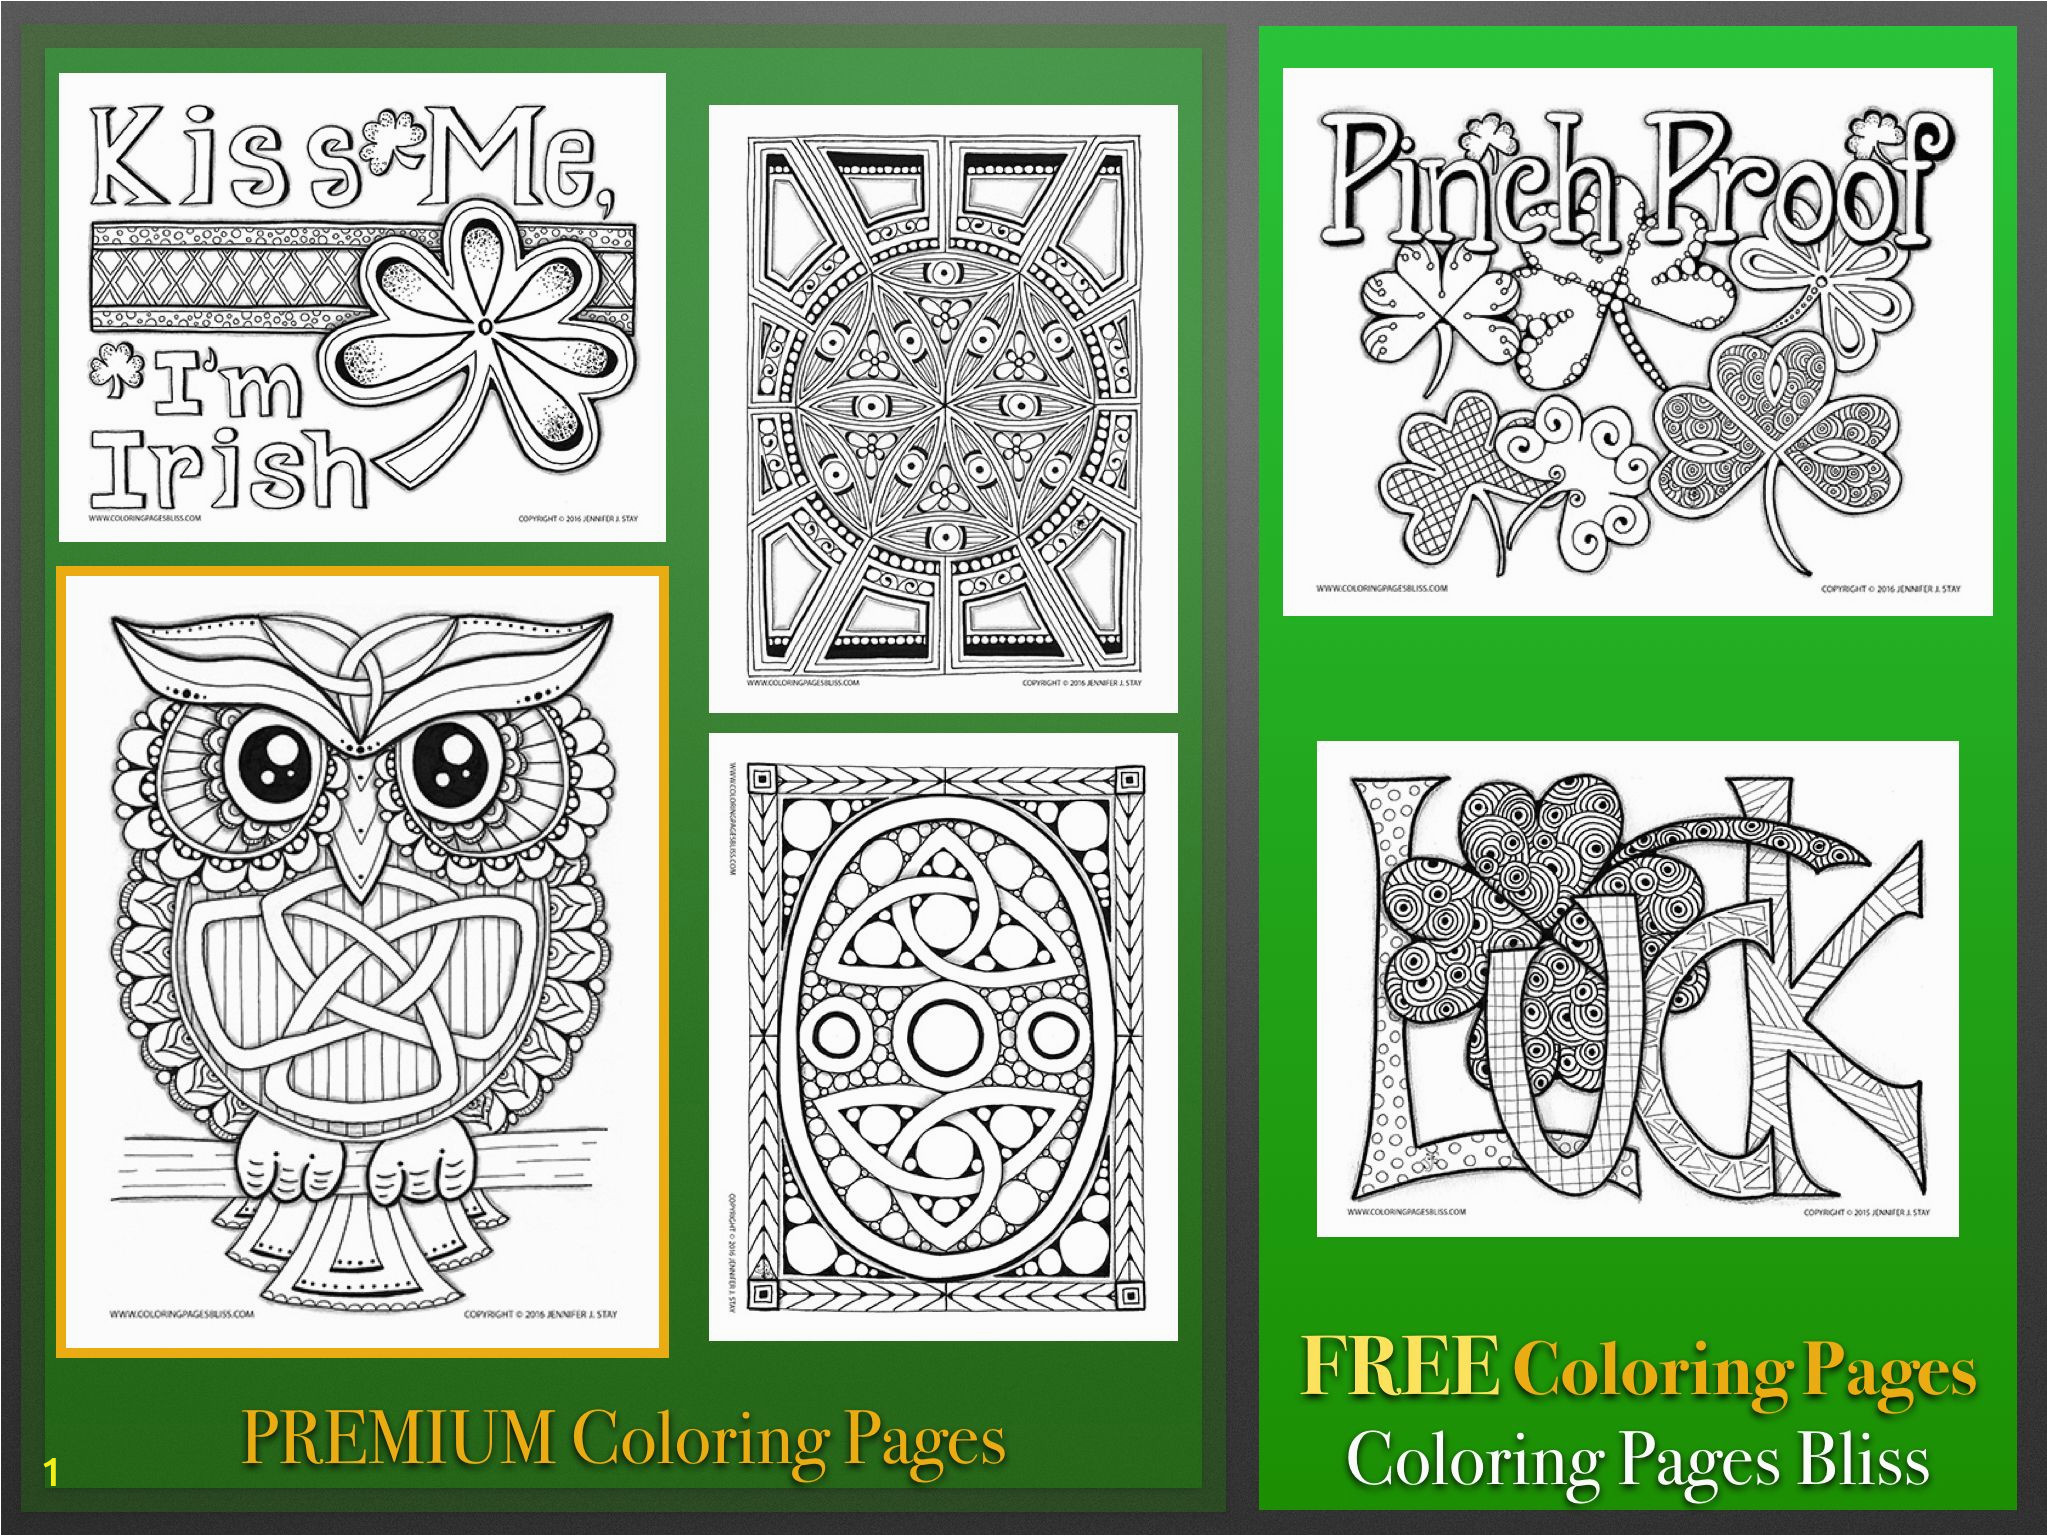 Free Leprechaun Coloring Pages Print Adult Coloring Pages Holiday St Pat S Day